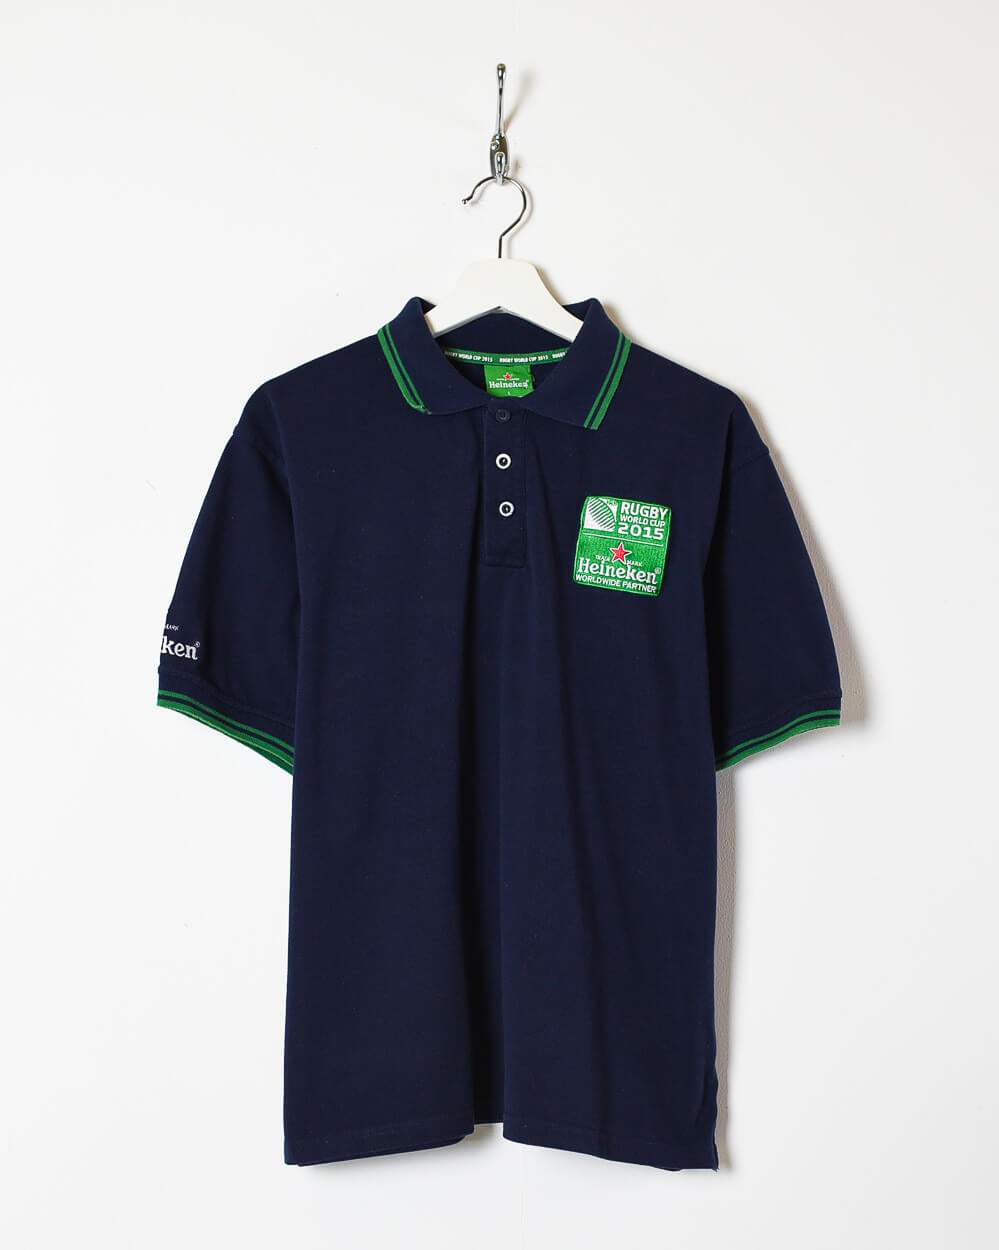 Navy Heineken Rugby World Cup 2015 Polo Shirt - Large